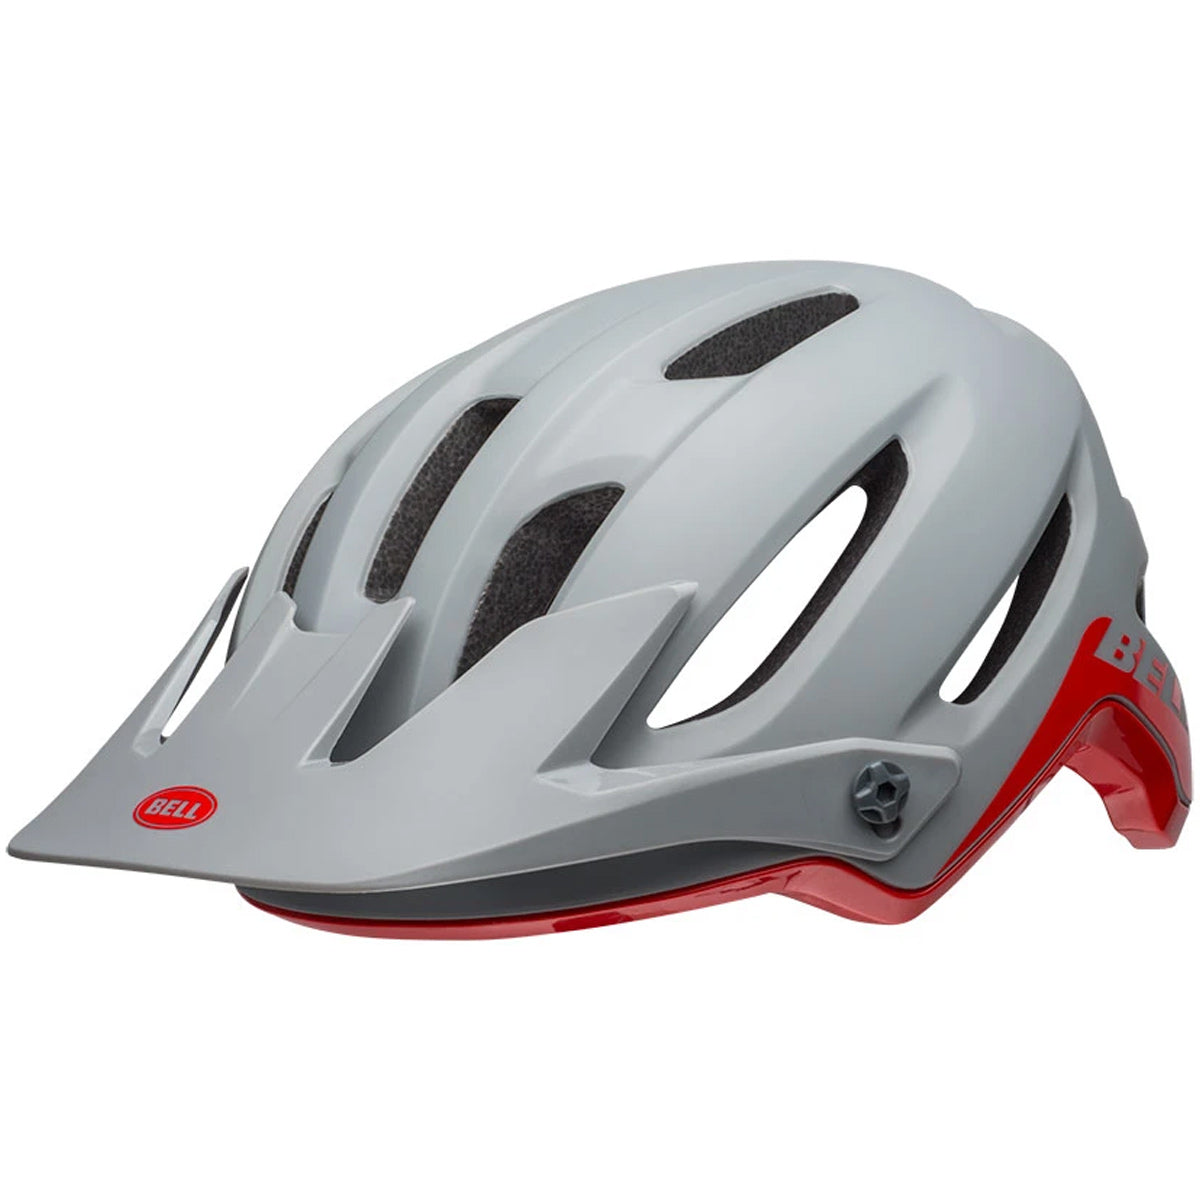 Bell casco mtb 4forty Mips grigio rosso